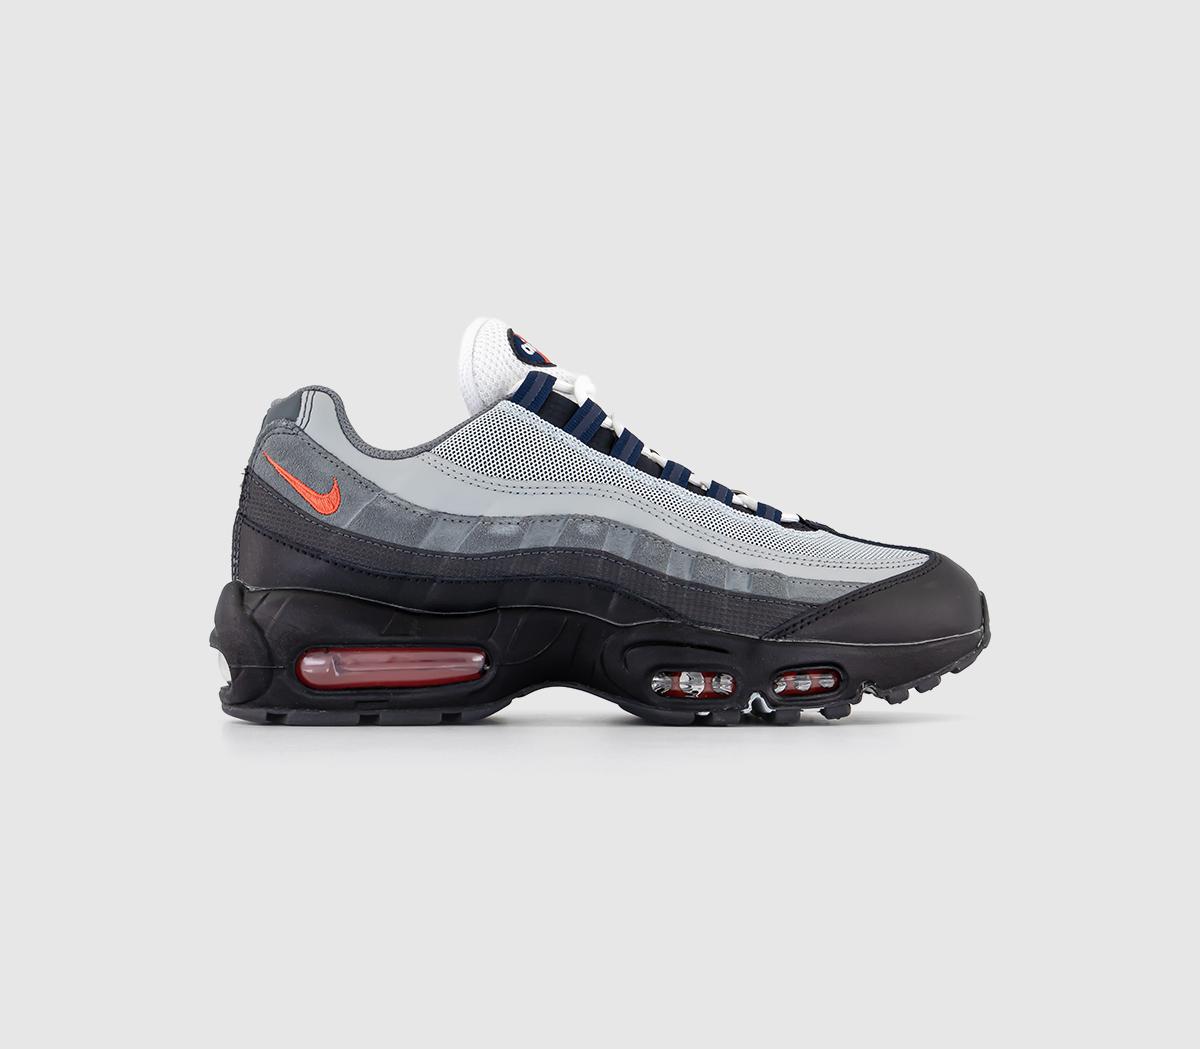 NikeAir Max 95 TrainersBlack Track Red Anthracite Smoke Grey